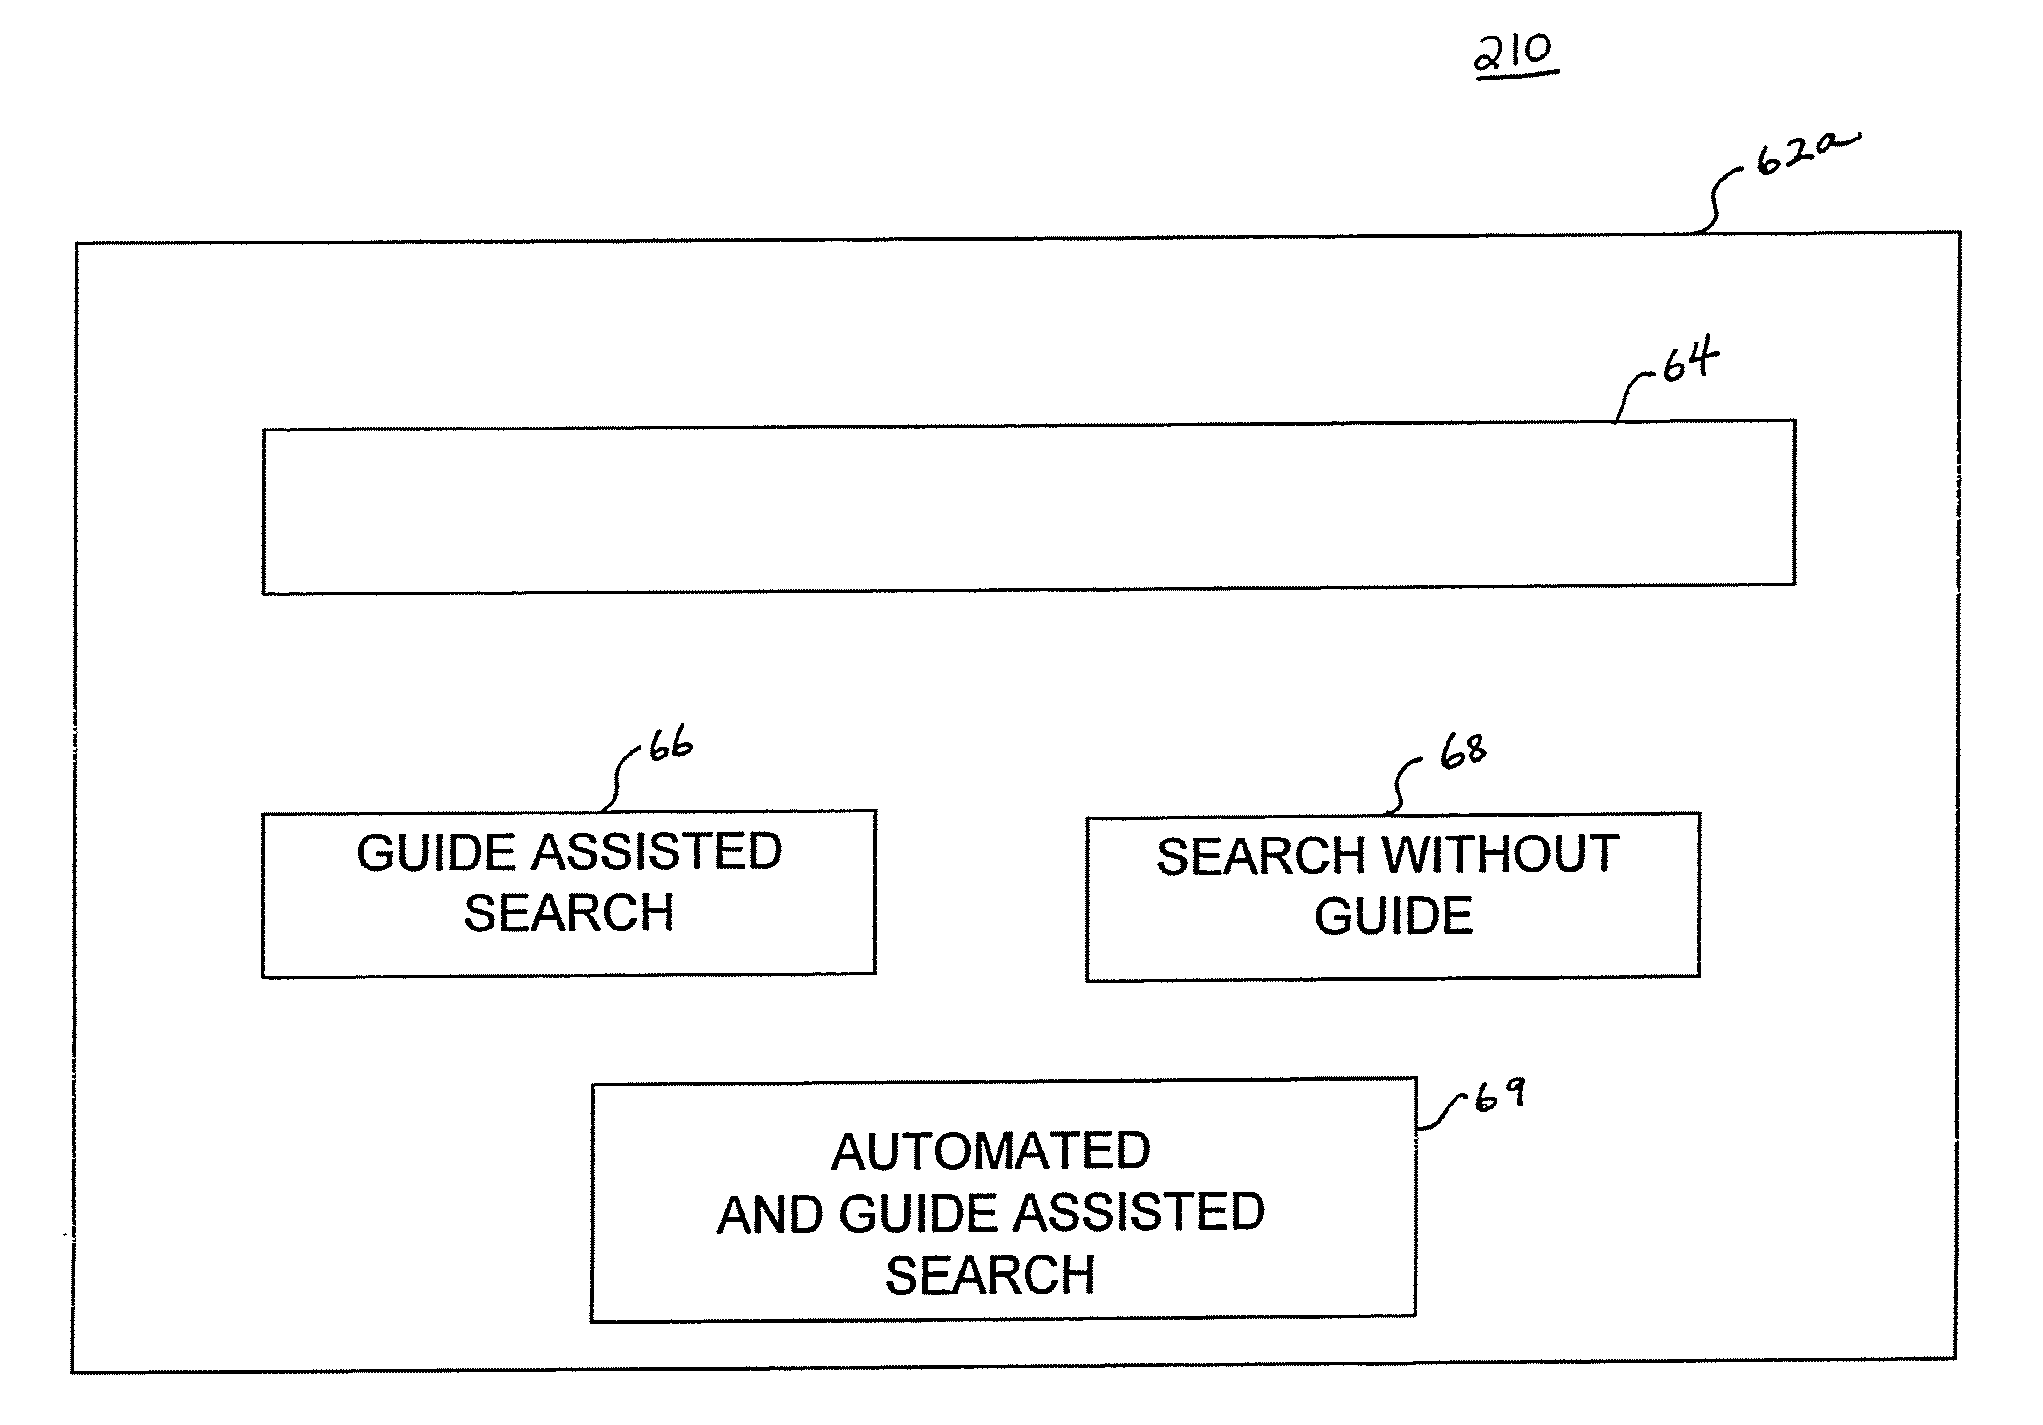 Search tool providing optional use of human search guides